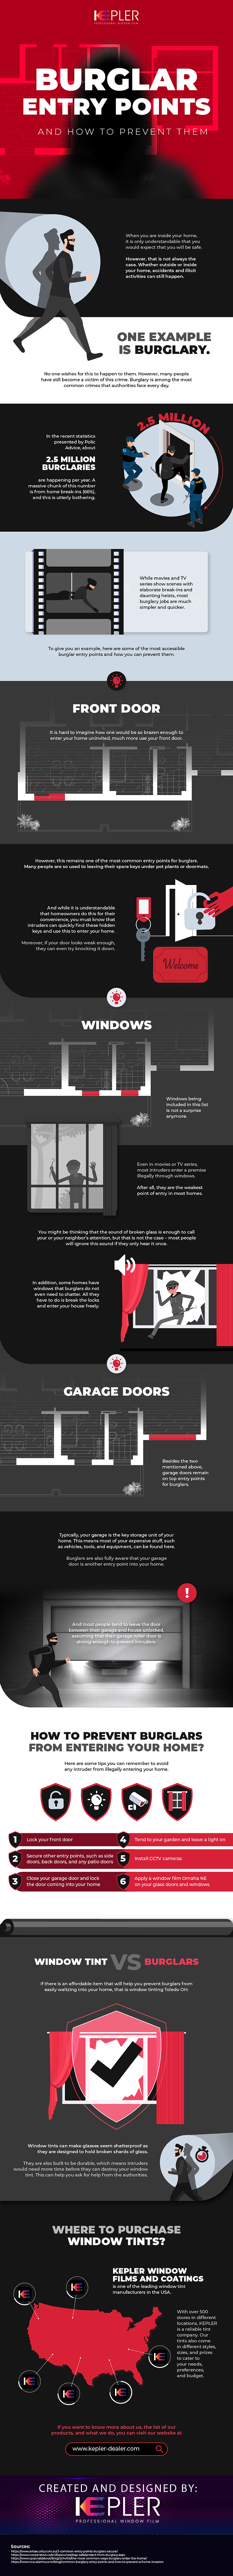 Burglar Entry Points and How to Prevent Them - Infographic